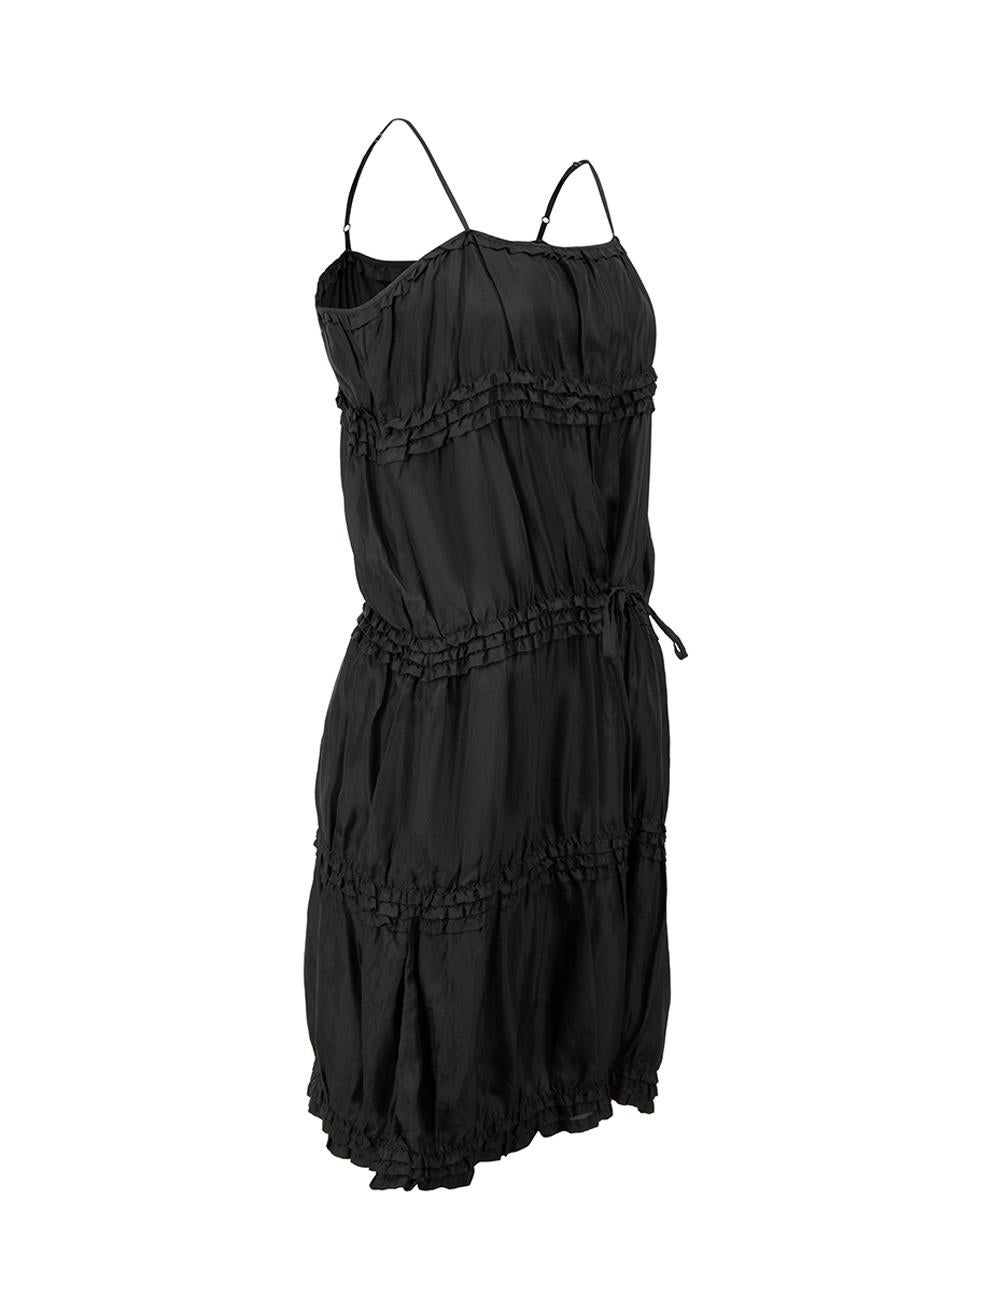 CONDITION is Very good. Hardly any visible wear to dress is evident on this used Theory designer resale item.



Details


Black

Silk

Dress

Mini

Sleeveless

Adjustable shoulder straps

Square neckline

Ruffle tiers

Drawstring waist

Side zip